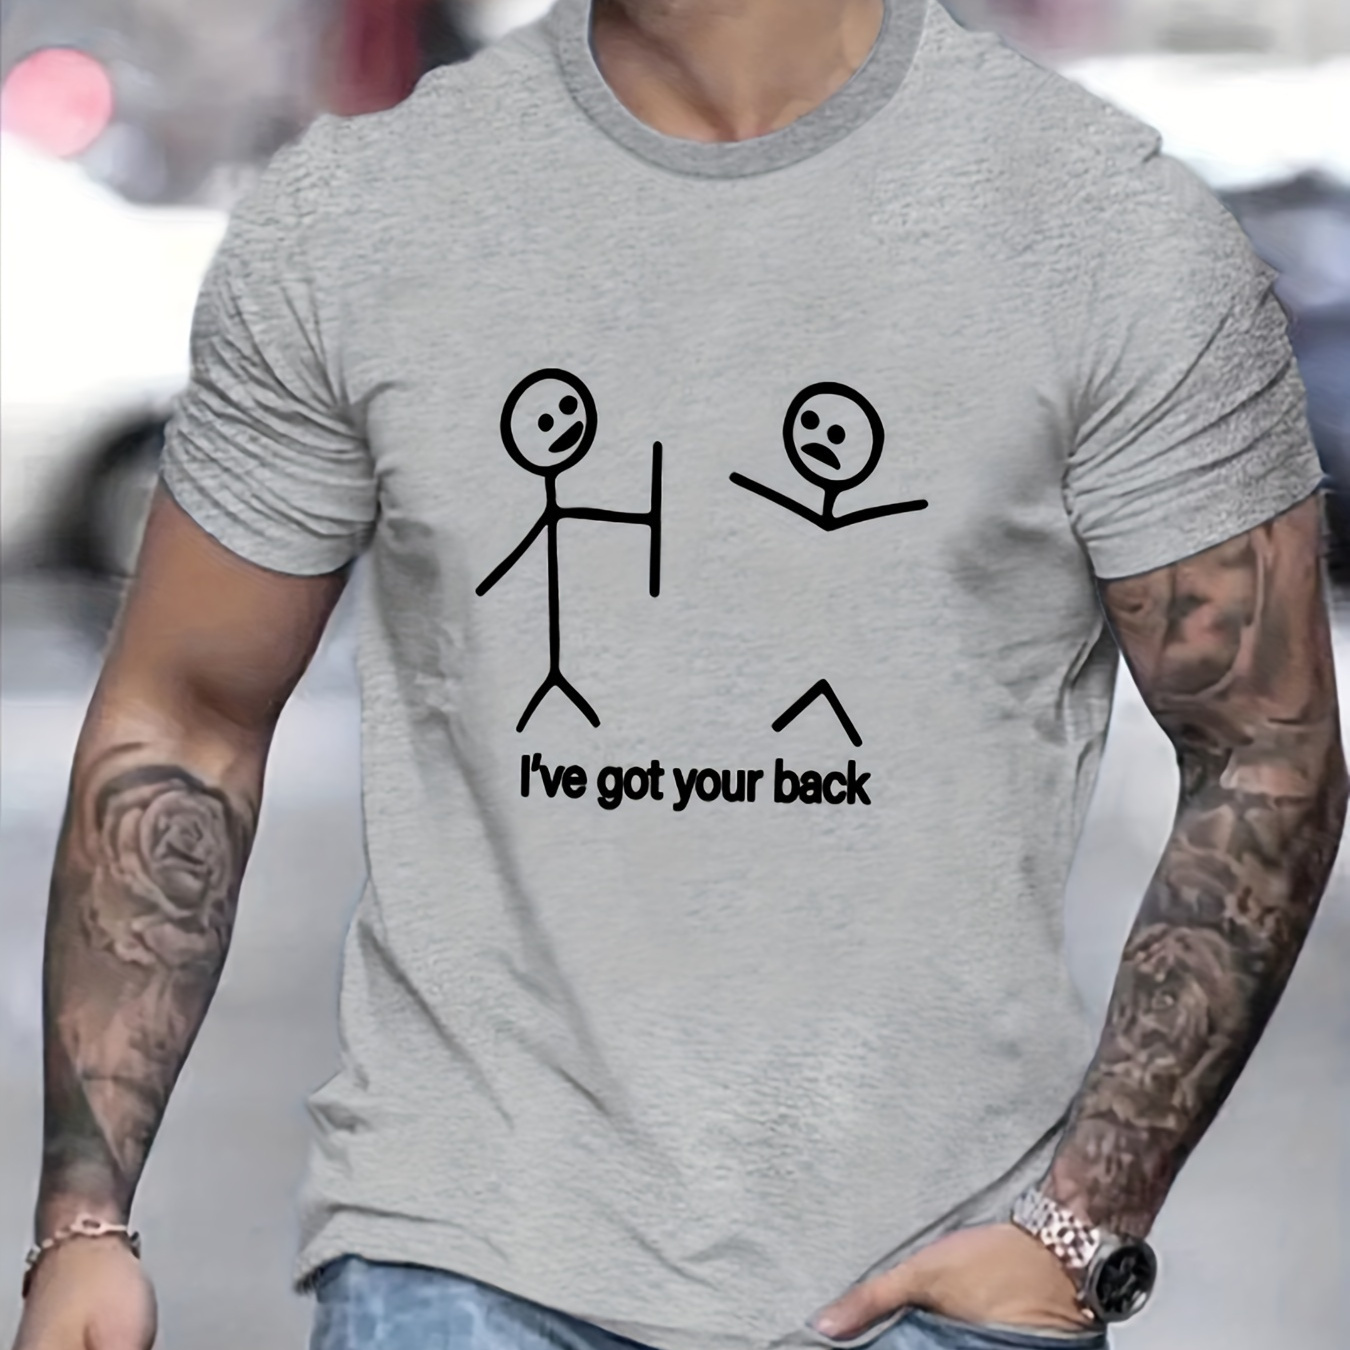 

I've Got Your Back And Anime Matchstick Figures Graphic Print, Men's Novel Graphic Design T-shirt, Casual Comfy Tees For Summer, Men's Clothing Tops For Daily Activities